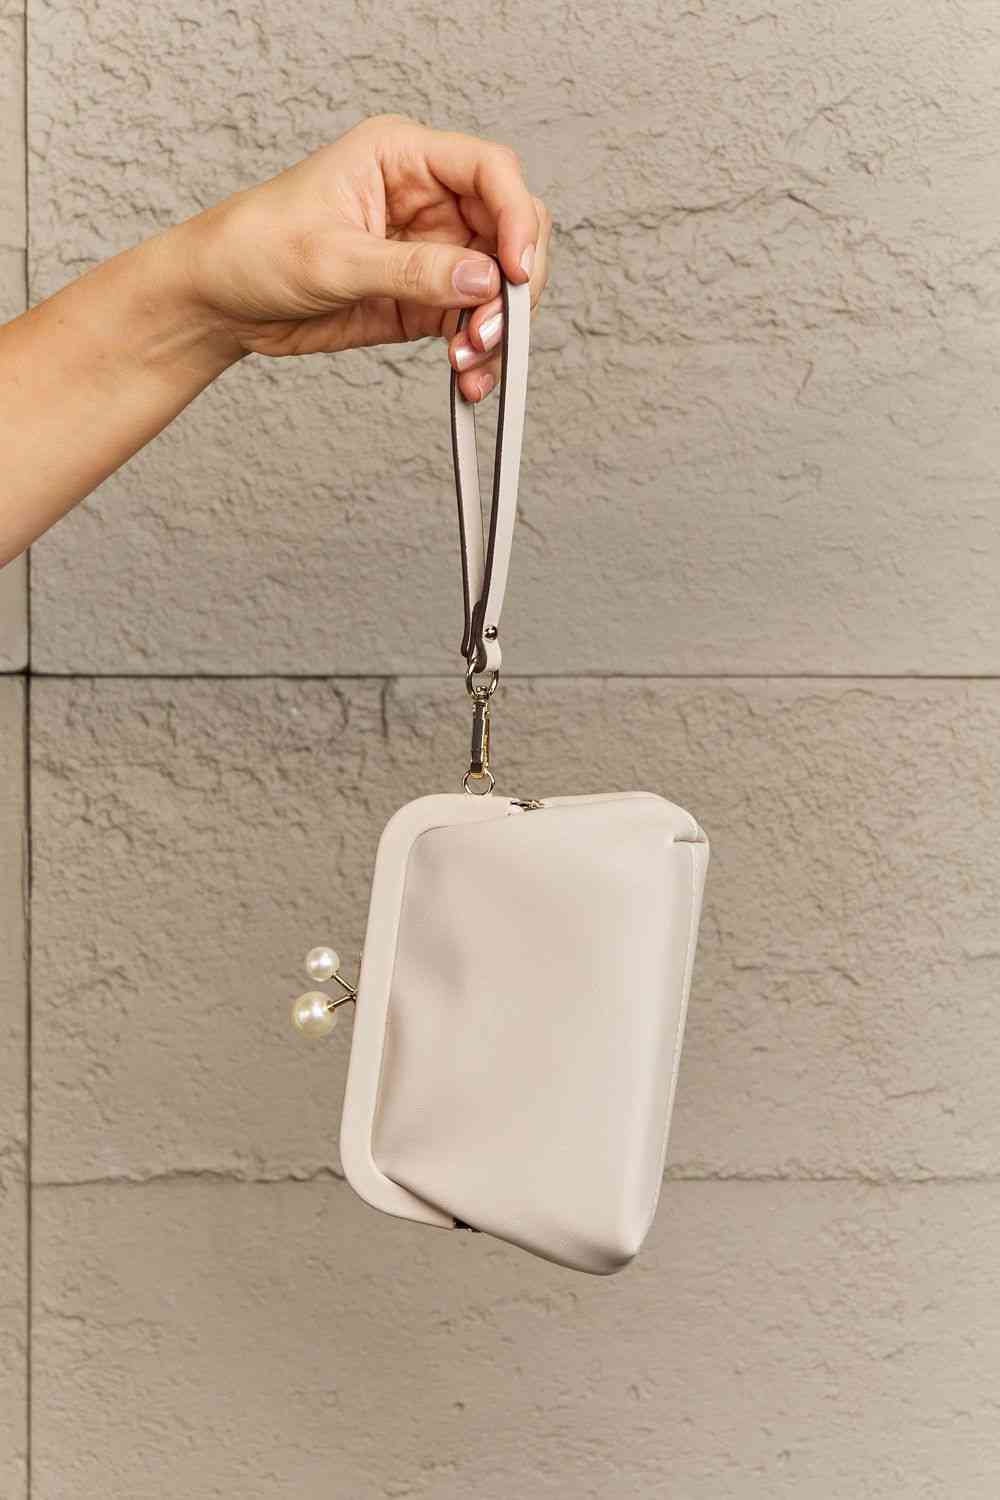 Nicole Lee USA Elise Pearl Coin Purse - GemThreads Boutique